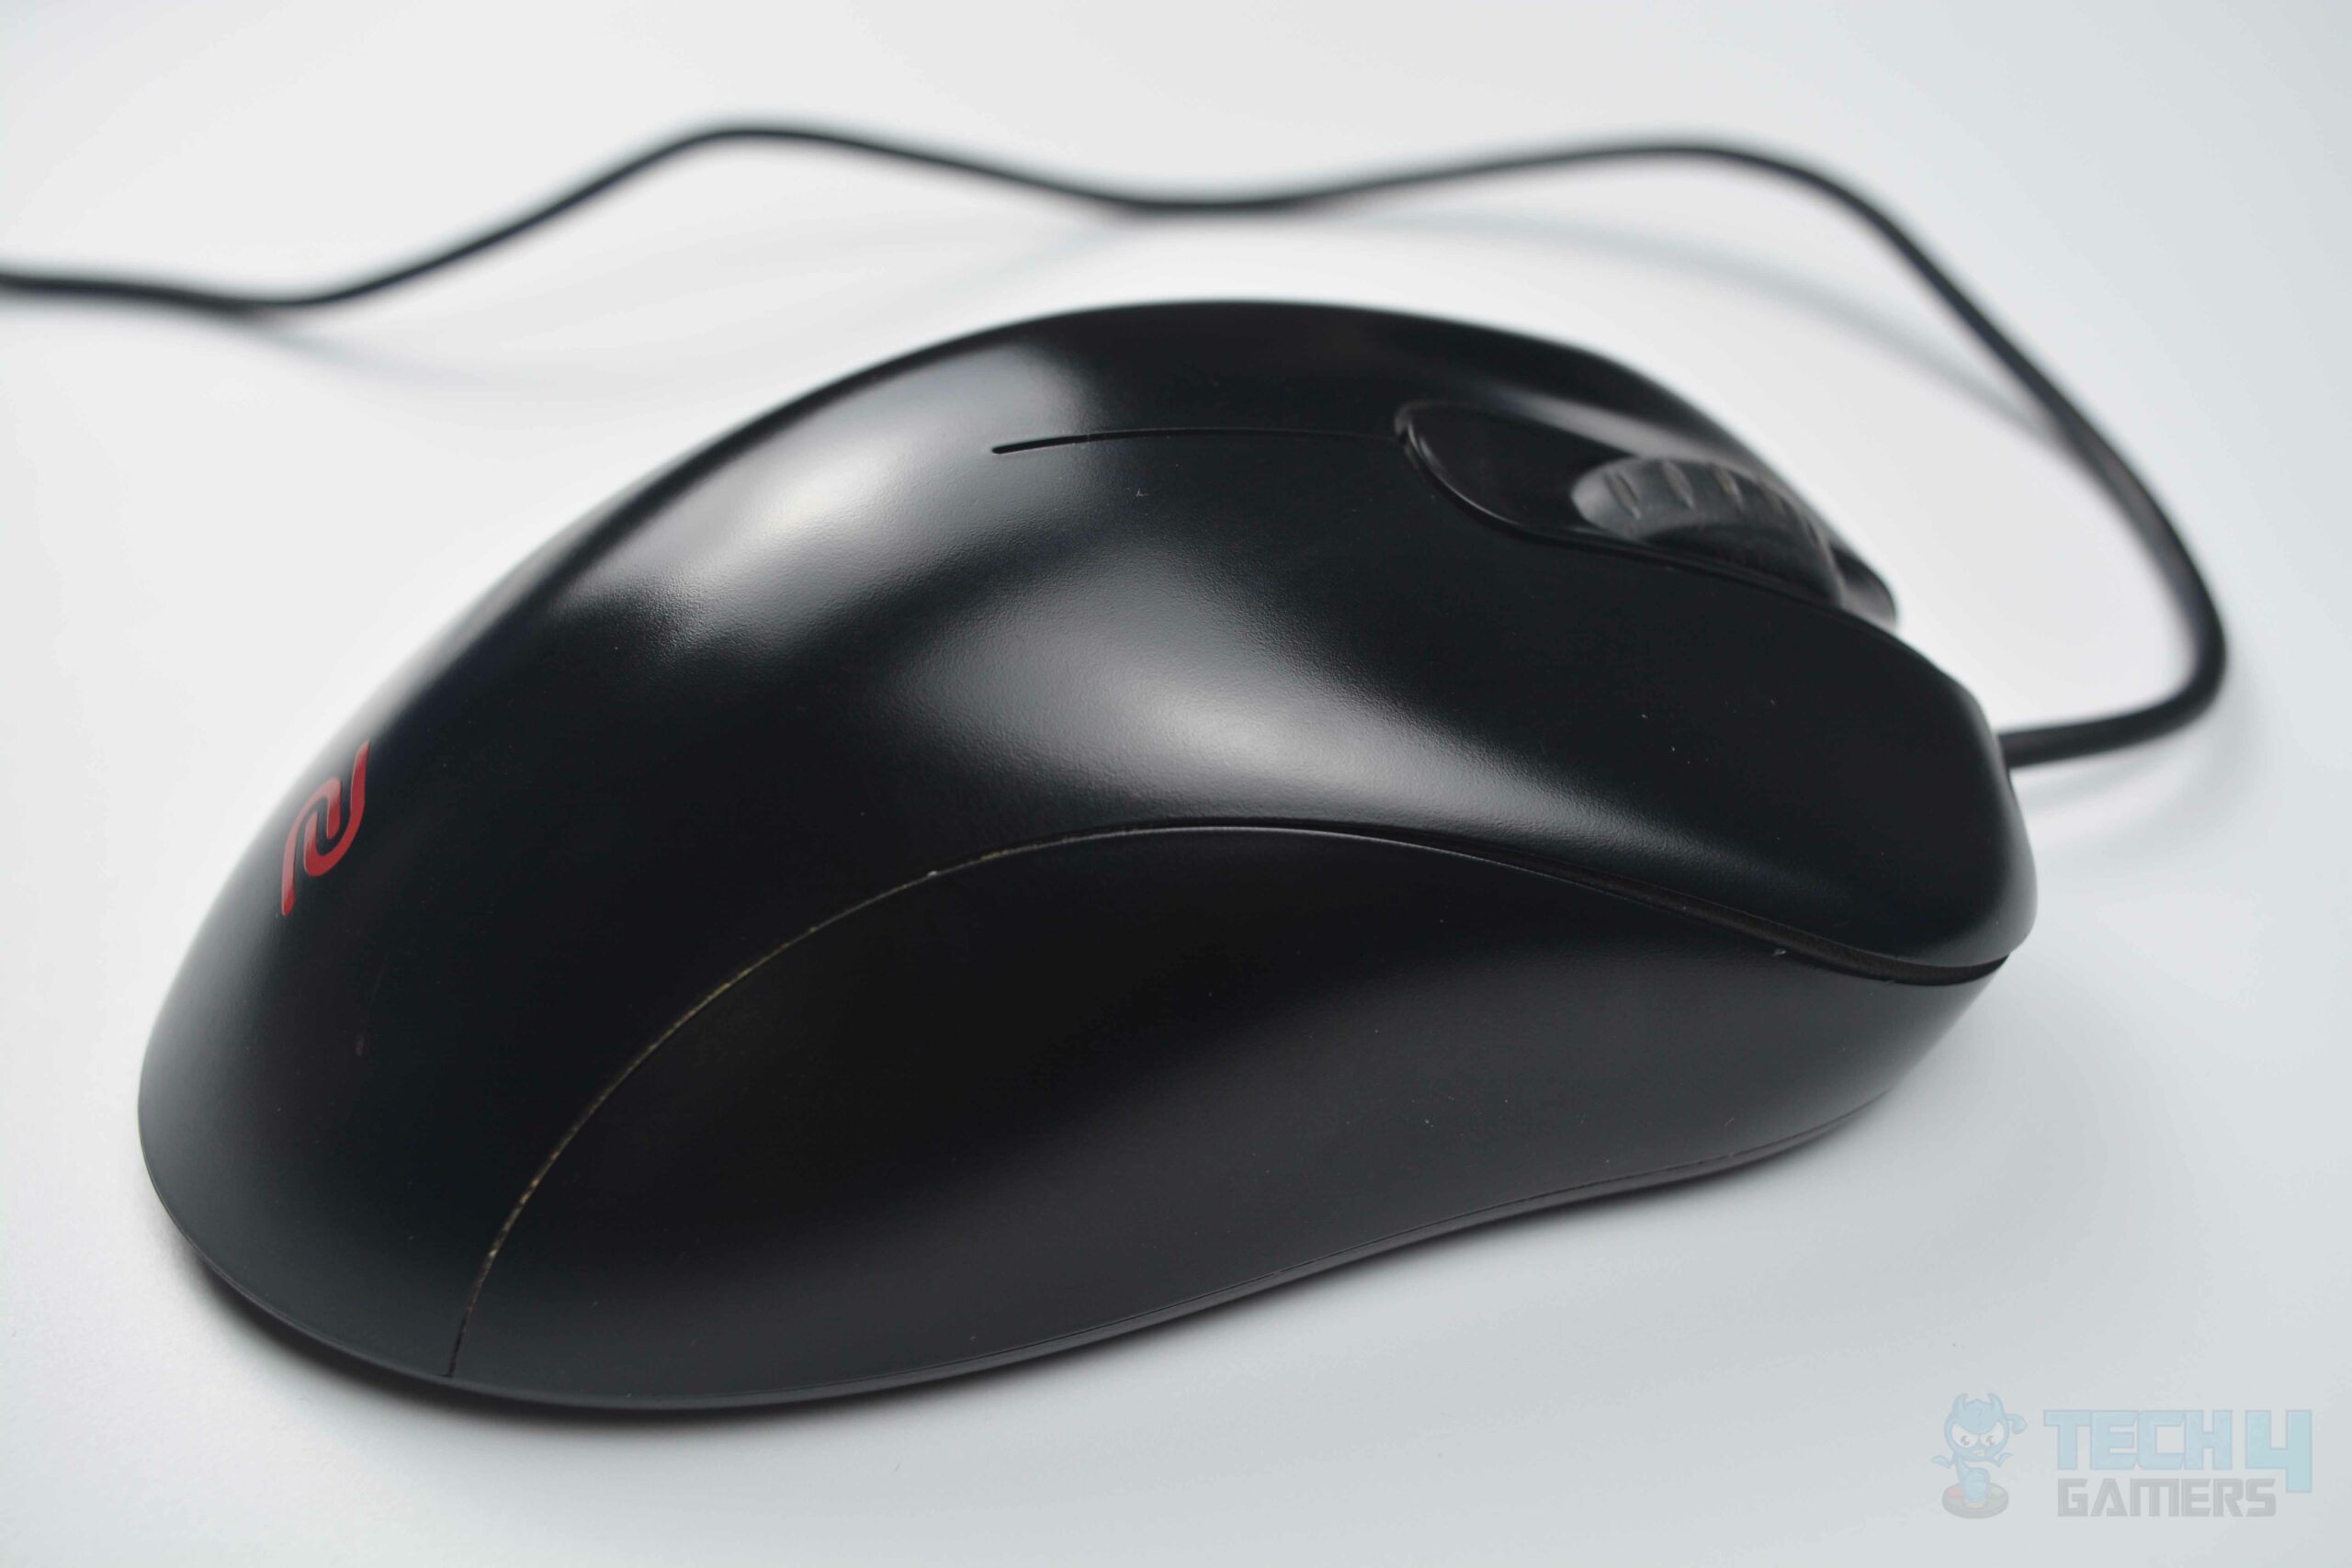 BenQ Zowie EC2-B Solid Grip and Comfortable Curve